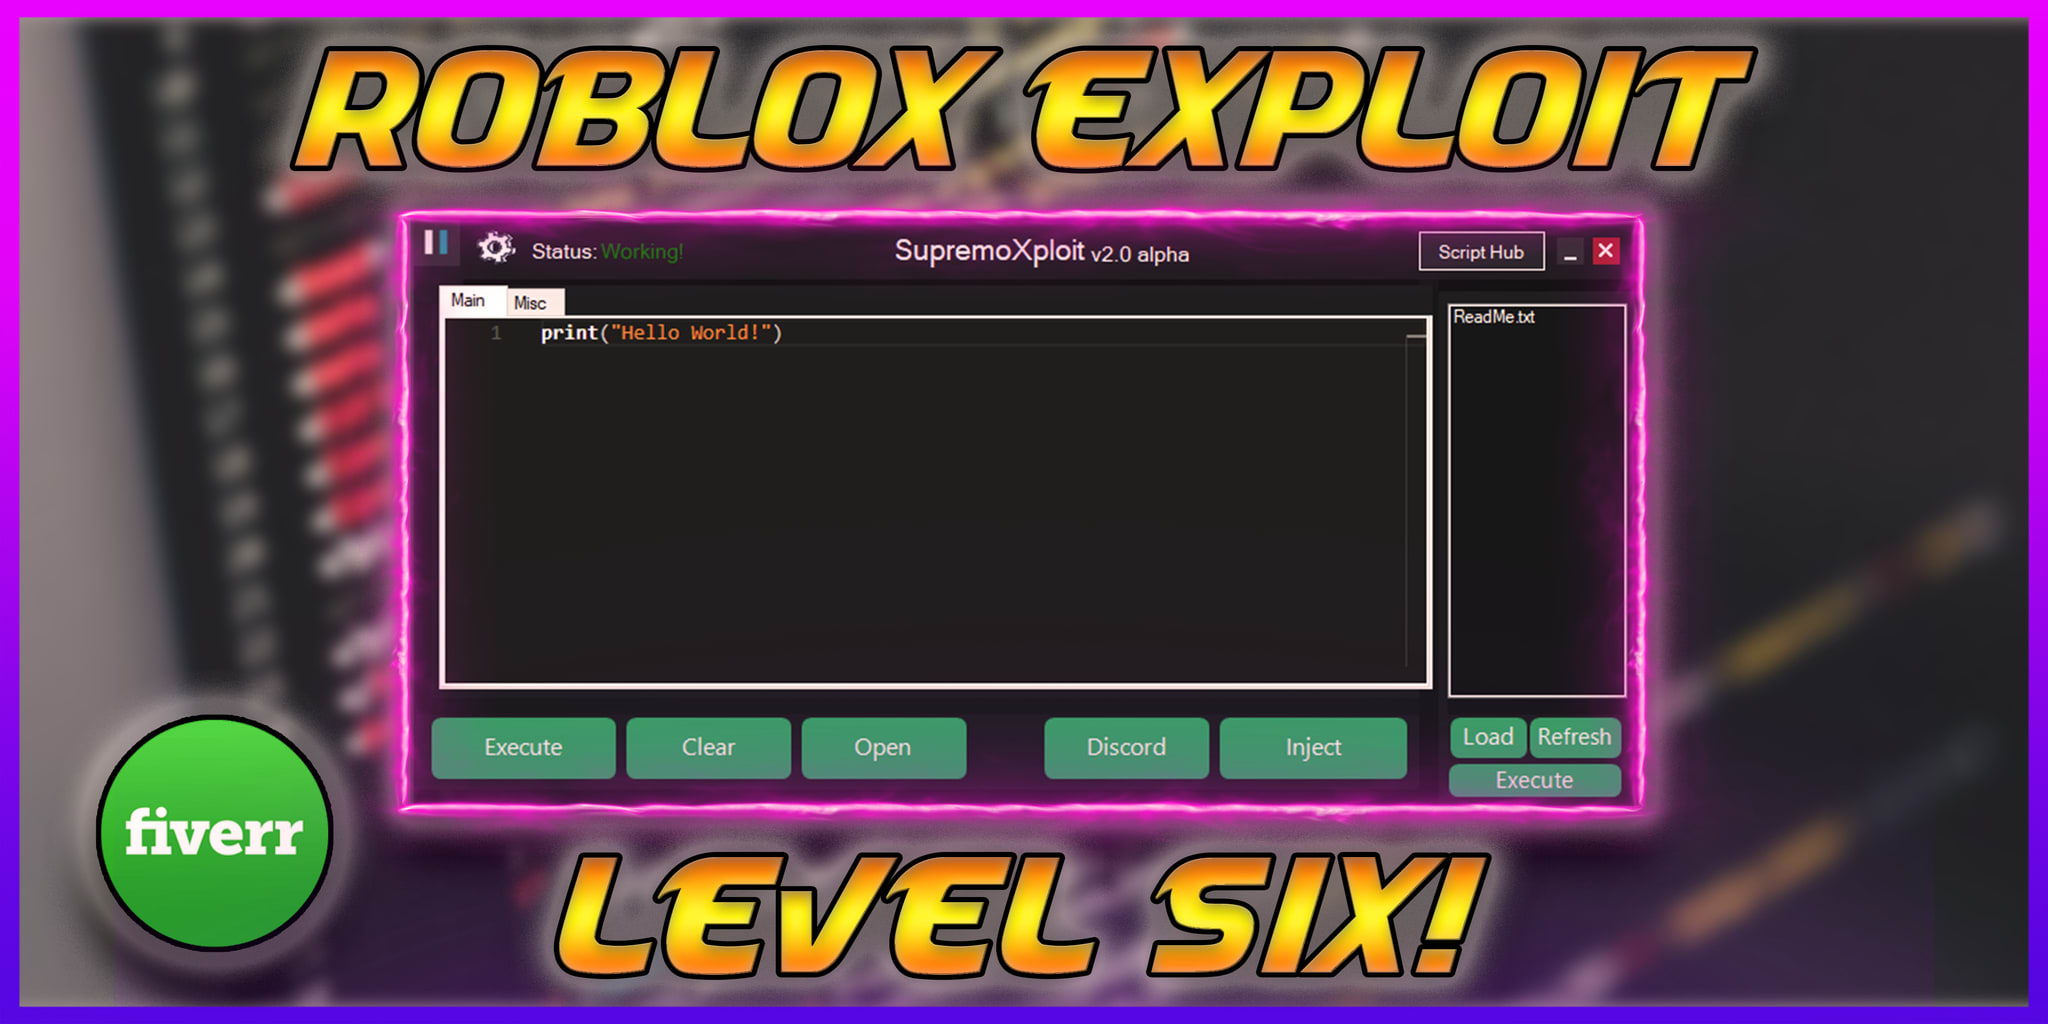 How To Make Your Own Exploit Roblox How To Make Your Own Exploit Roblox - Margaret Wiegel™. Aug 2023